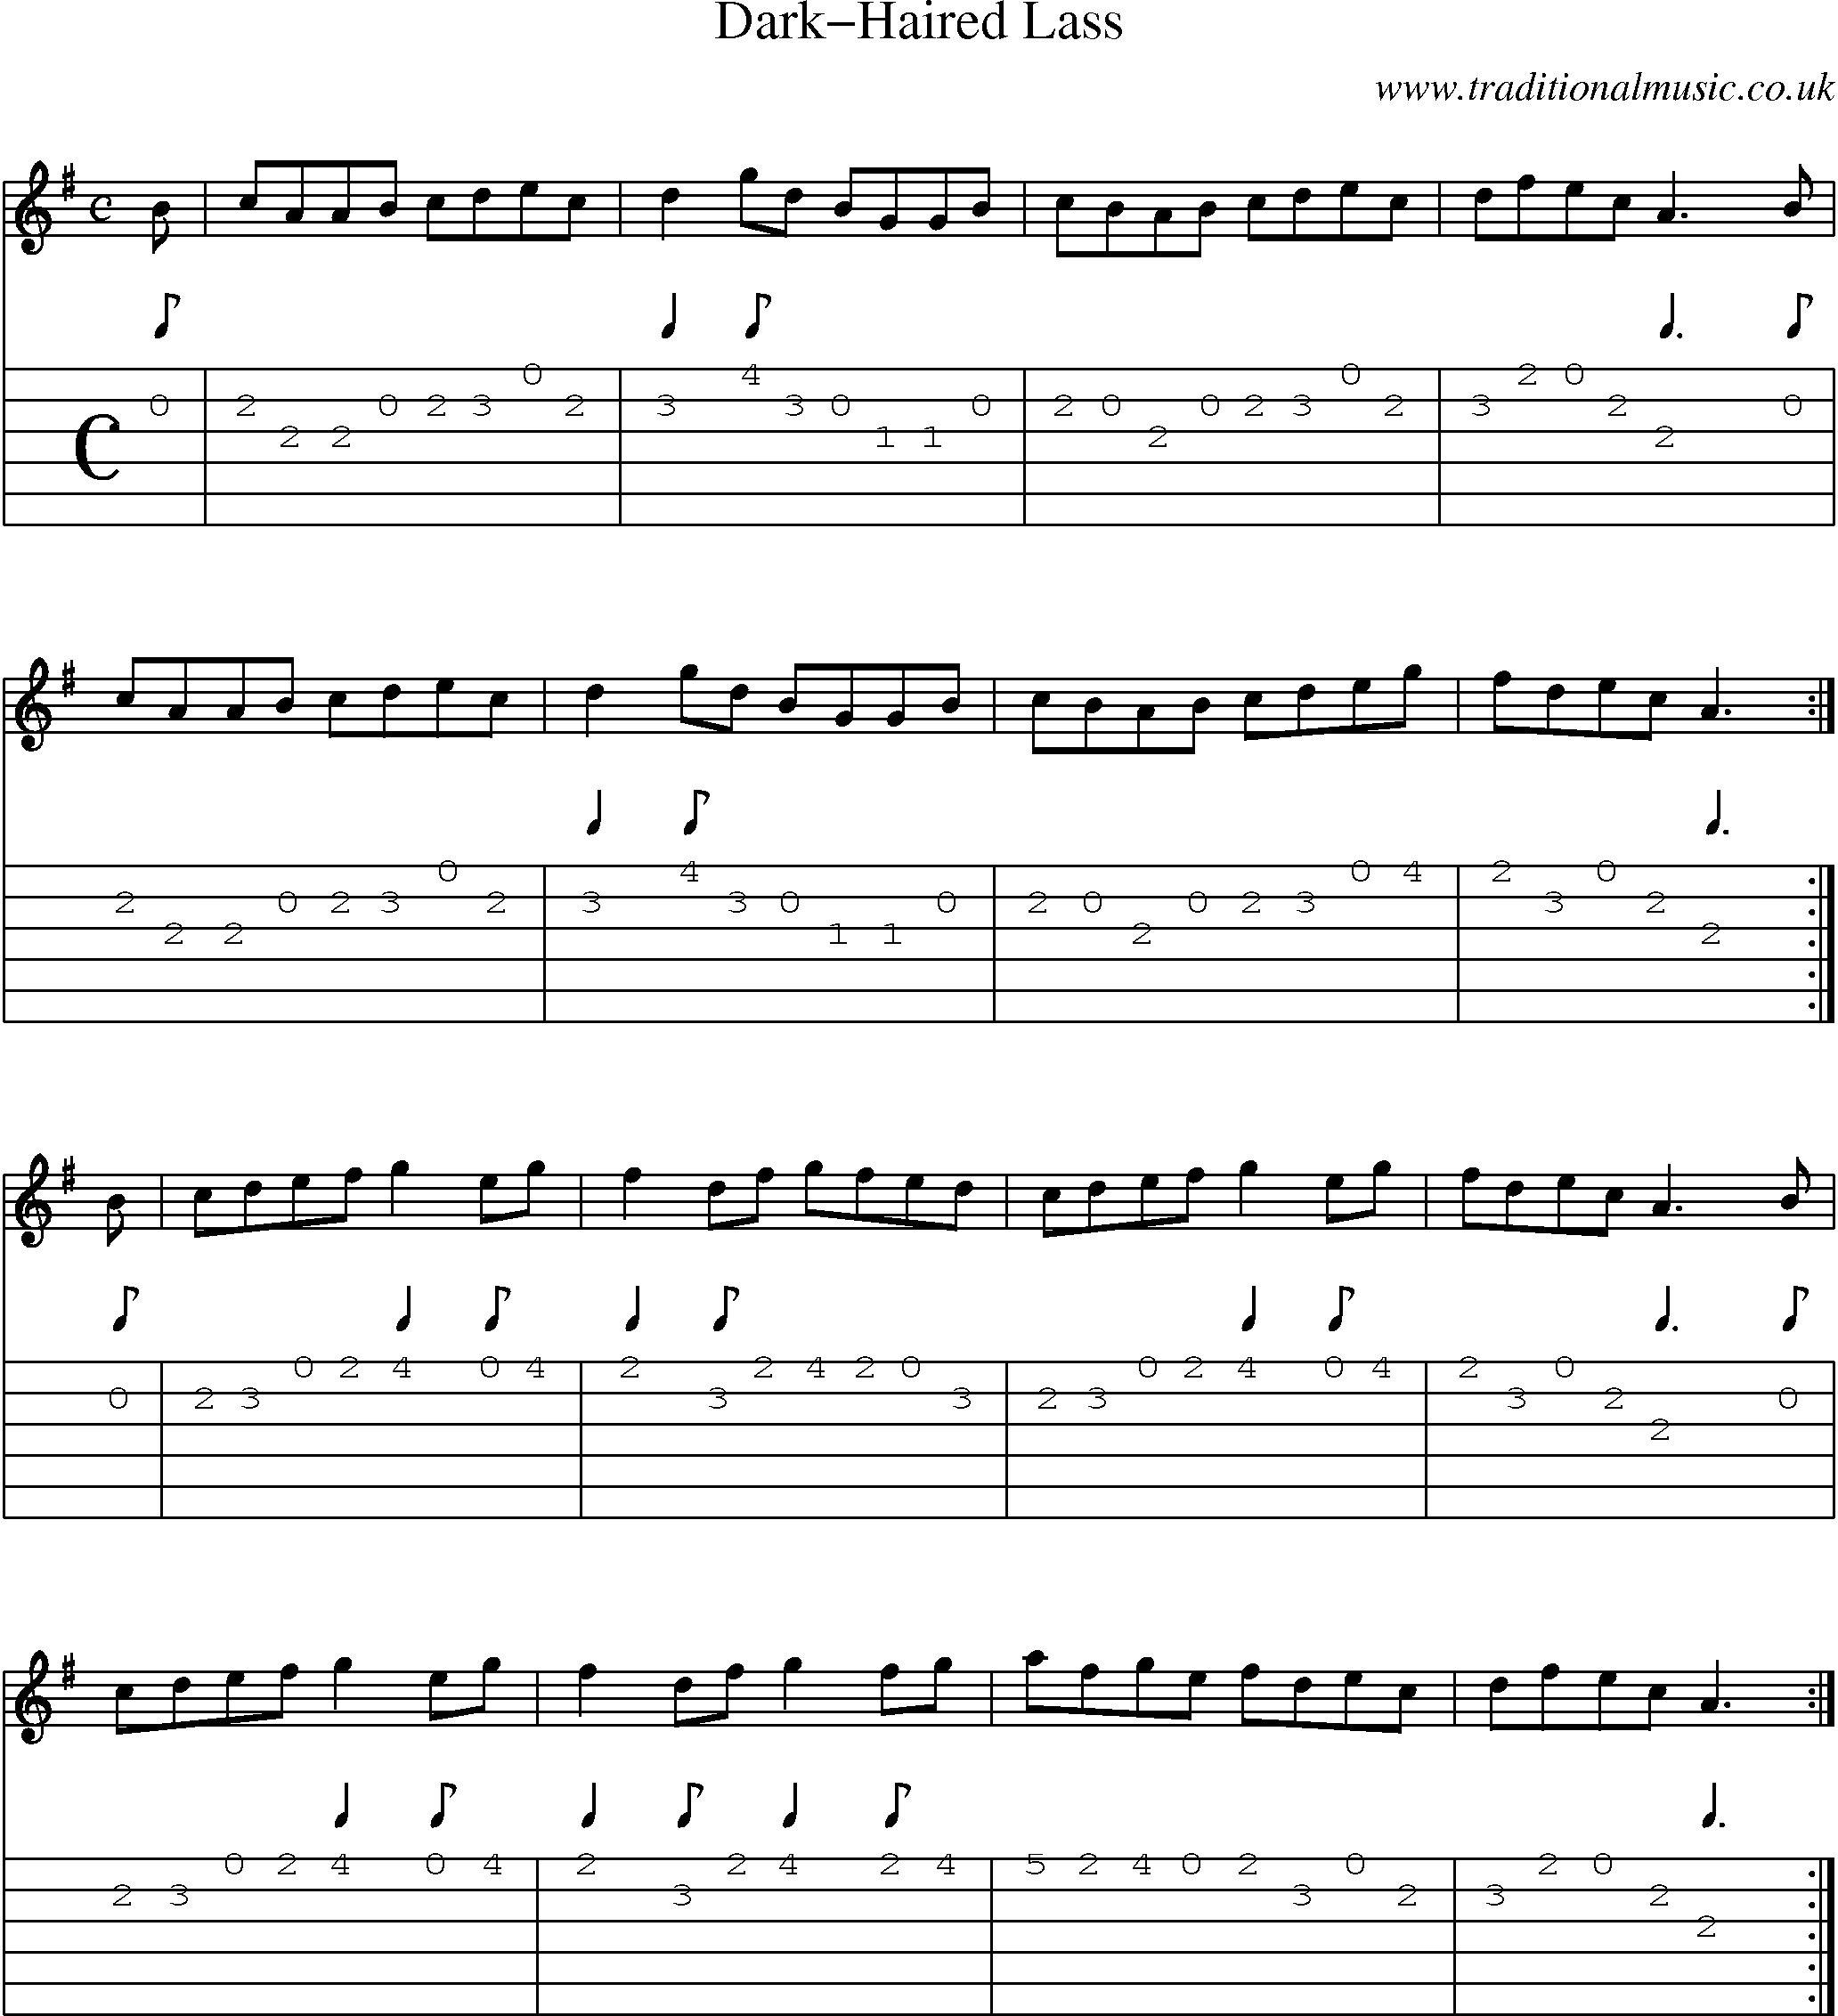 Music Score and Guitar Tabs for Darkhaired Lass